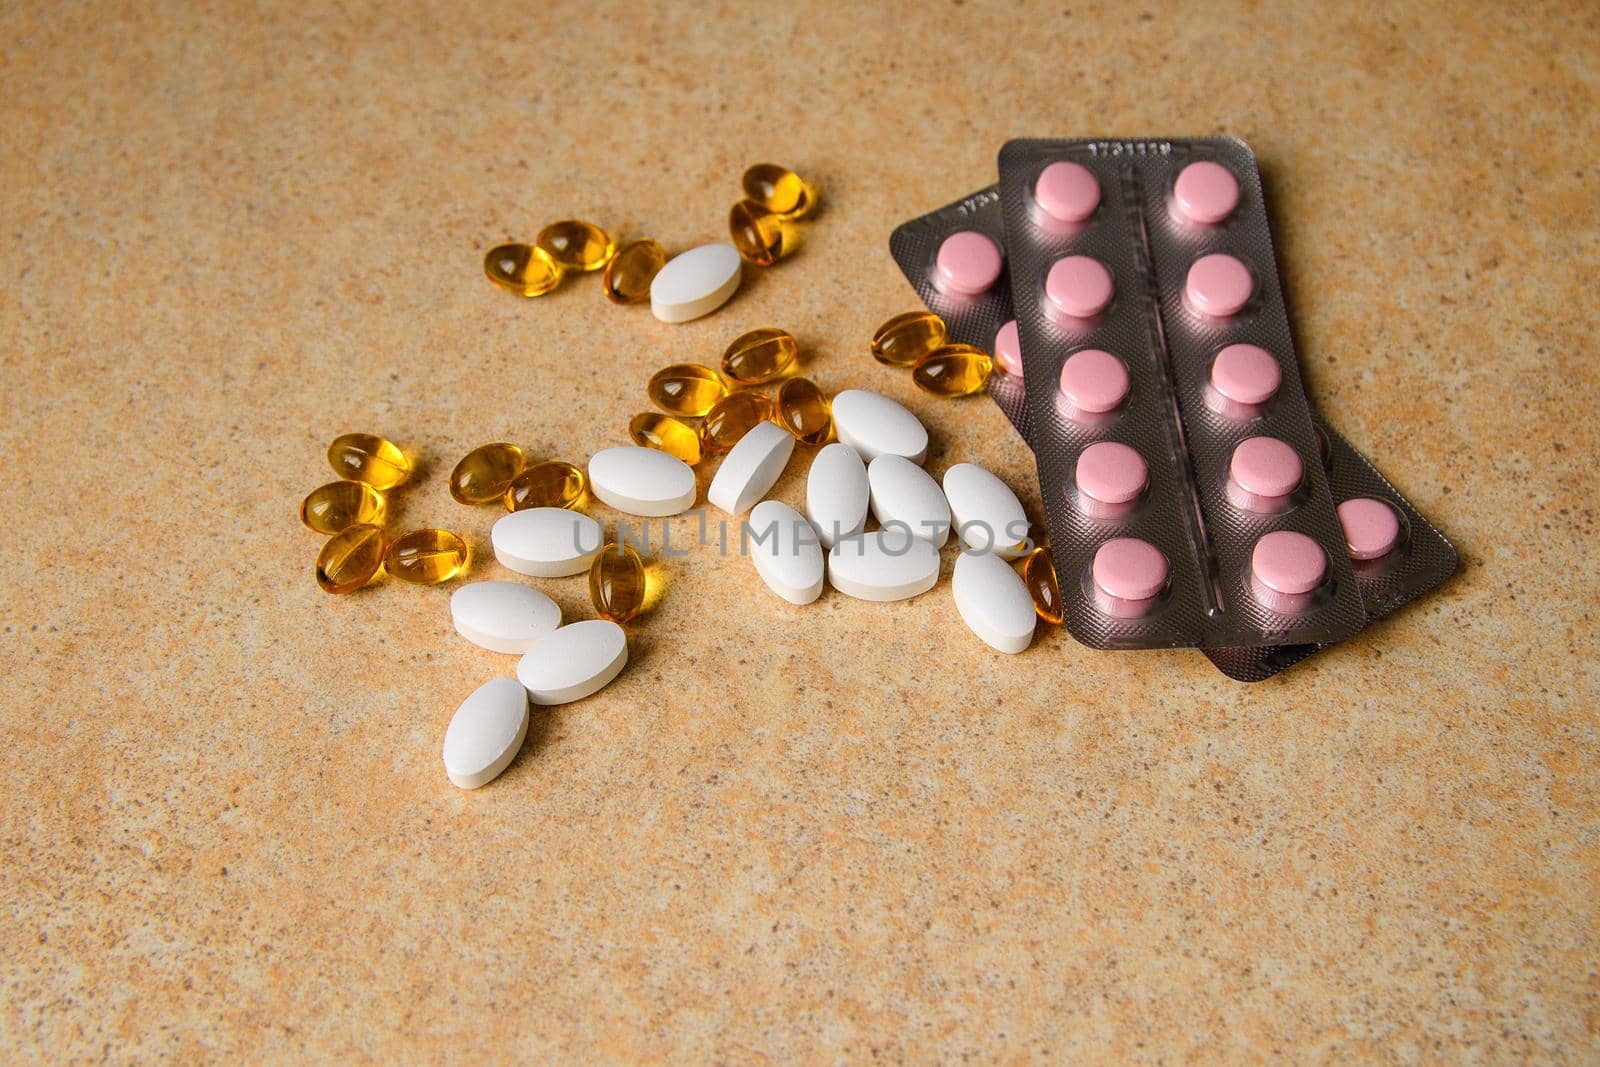 amber, pink and white capsules on a table with a pattern of sand